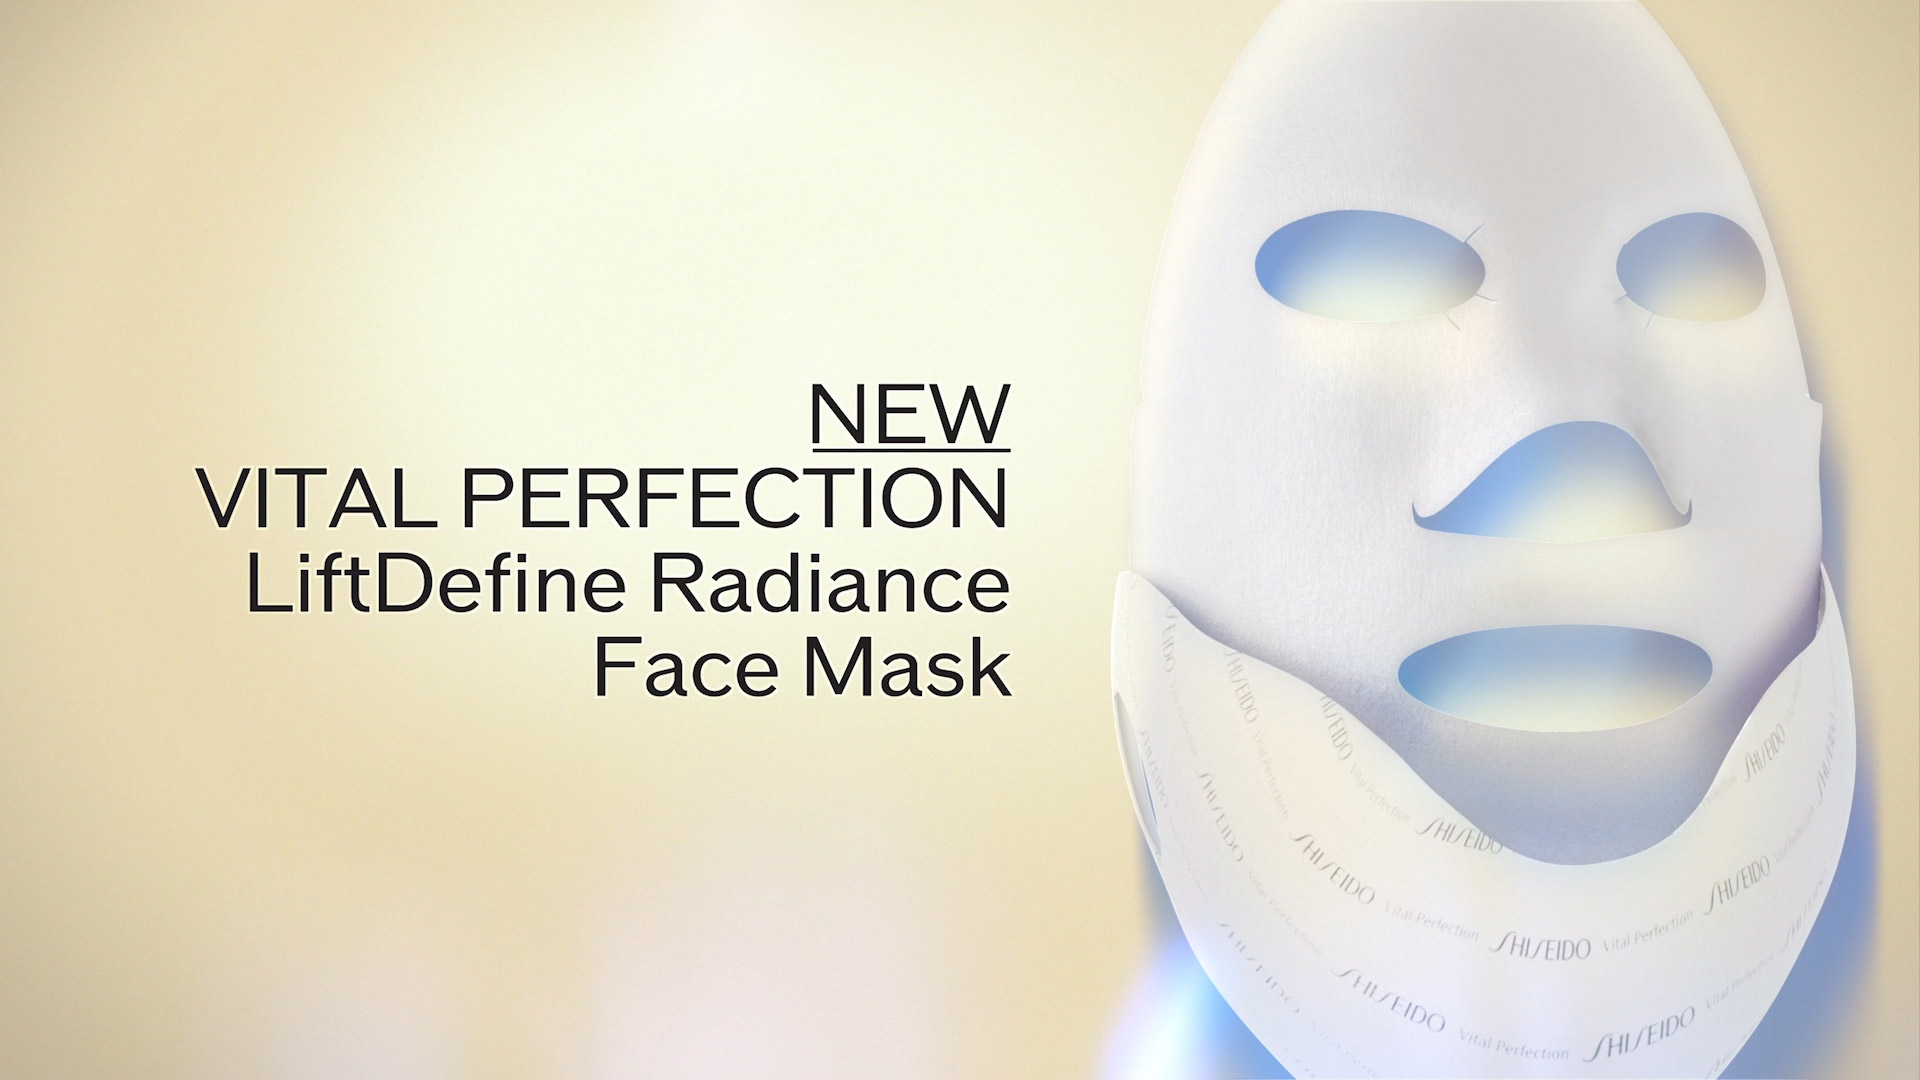 NEW Vital Perfection LifeDefine Radiance Face Mask